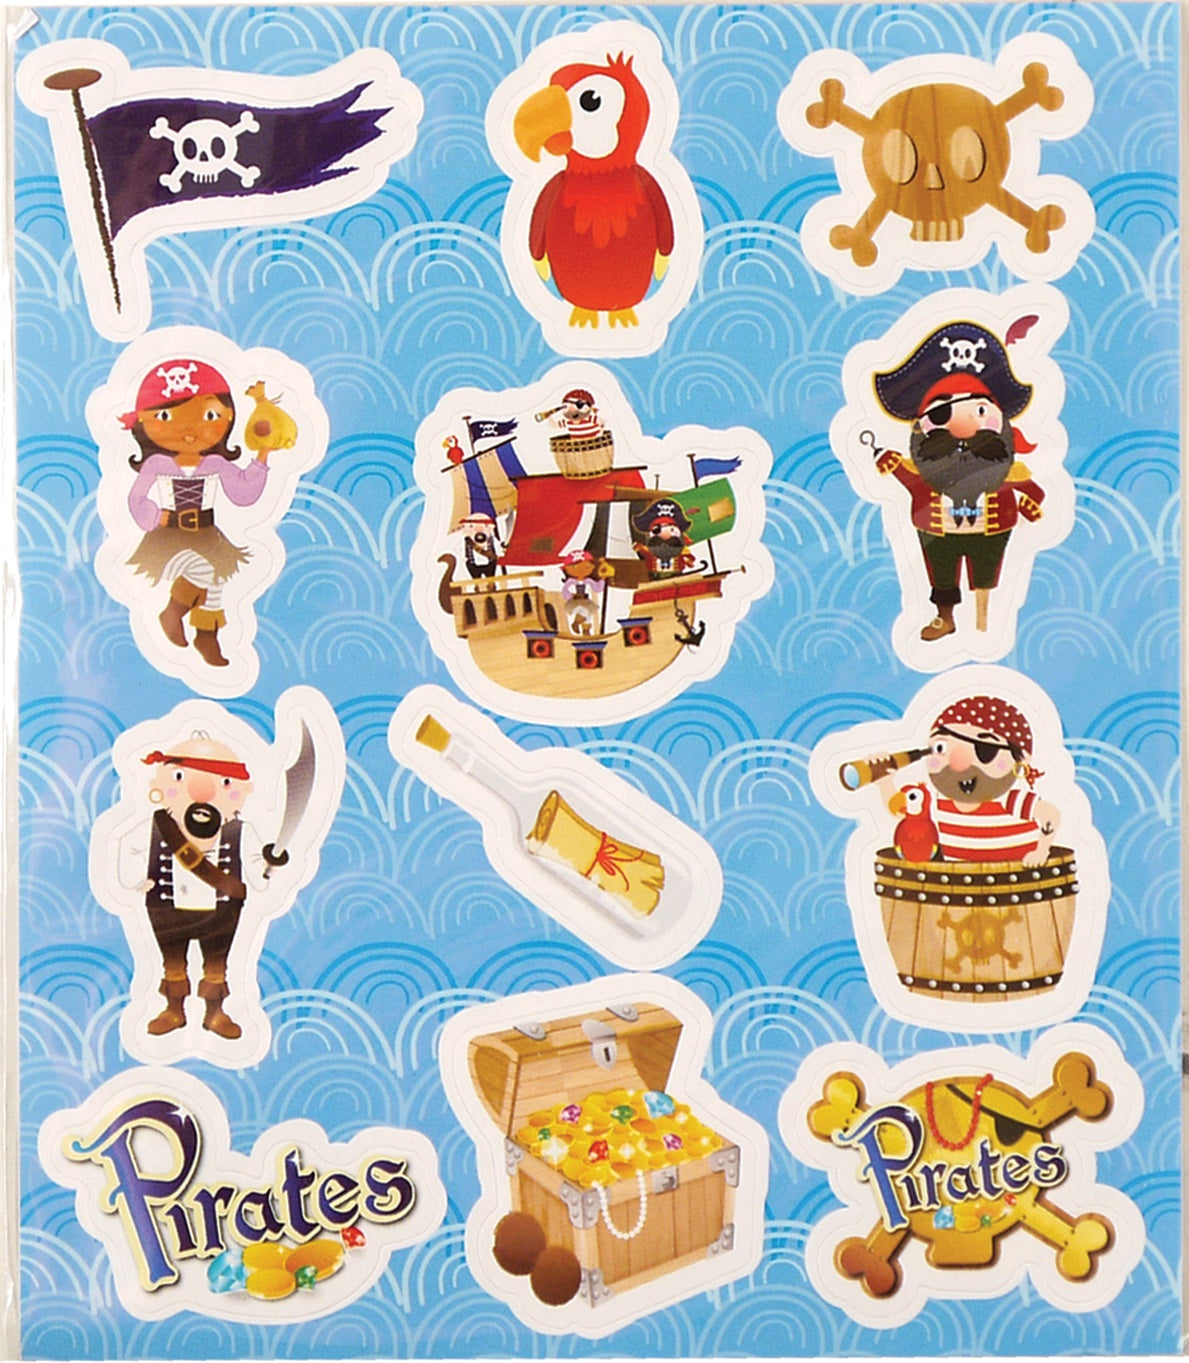 120 Sheets of 12 Pirate Stickers